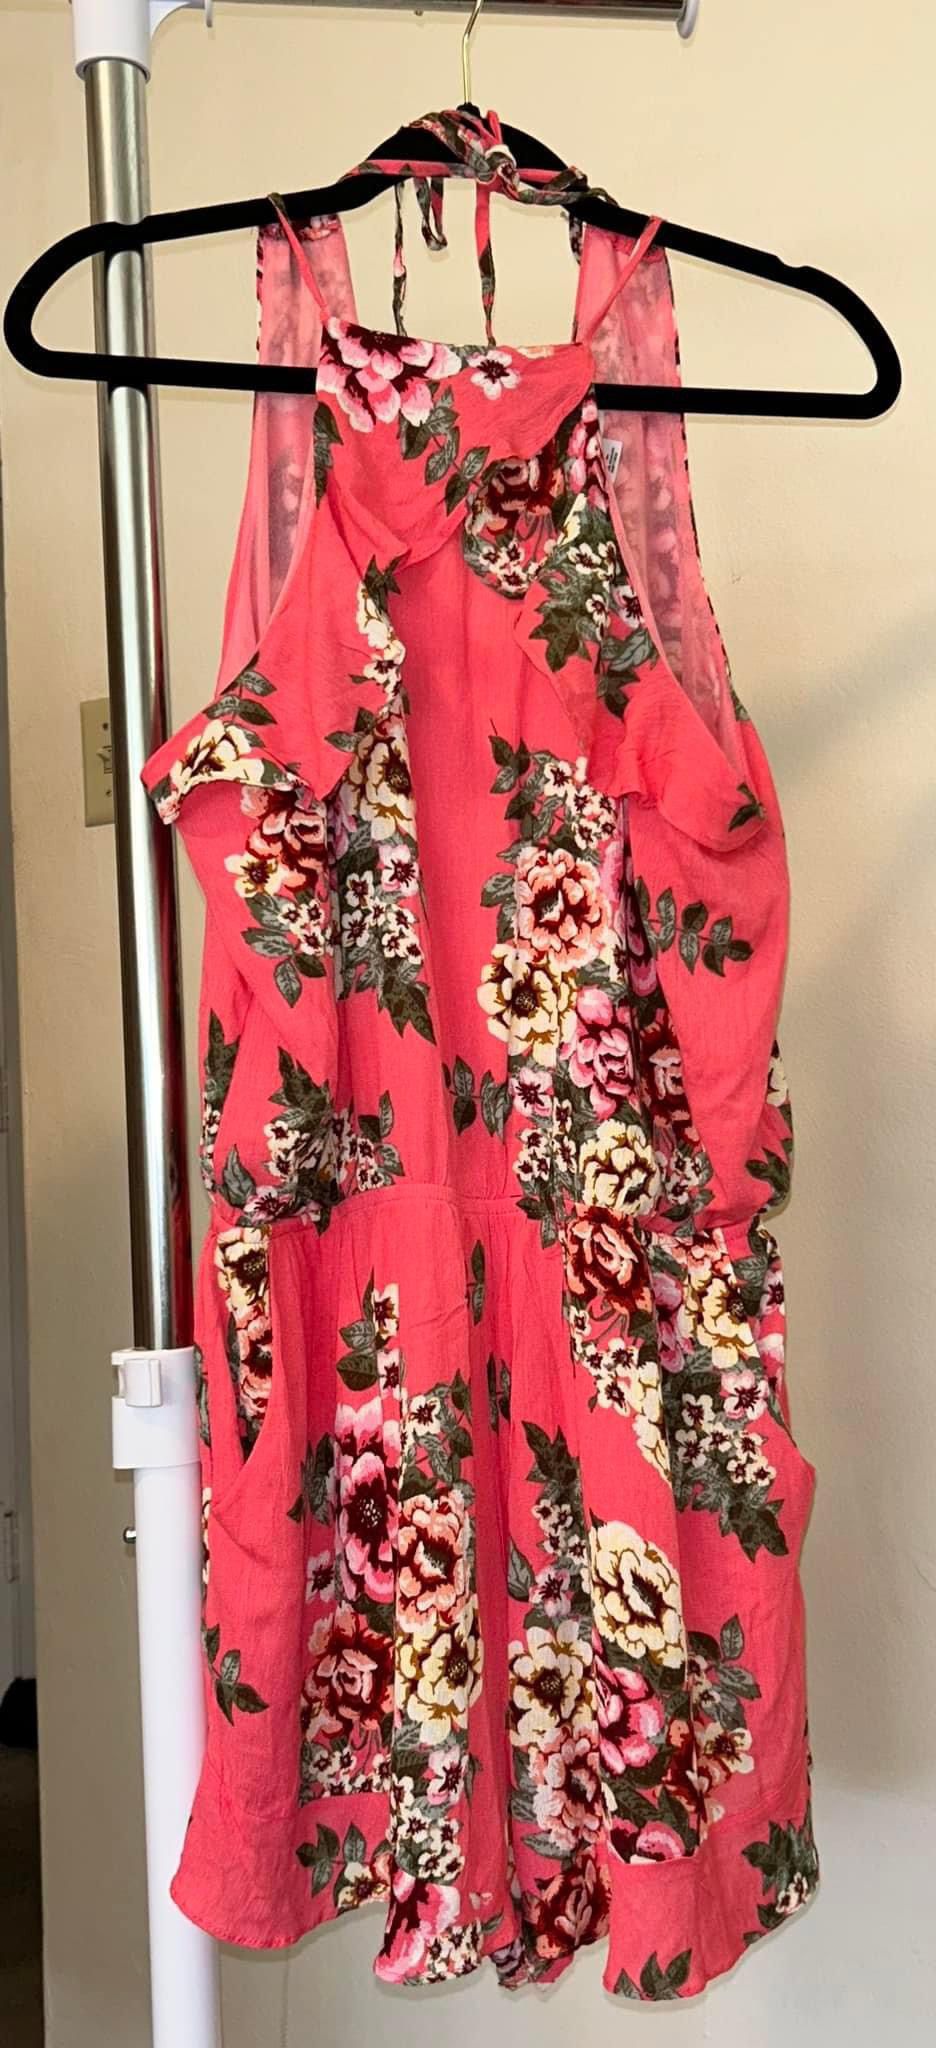 Exist Floral Printed Coral Colored Romper Size XL